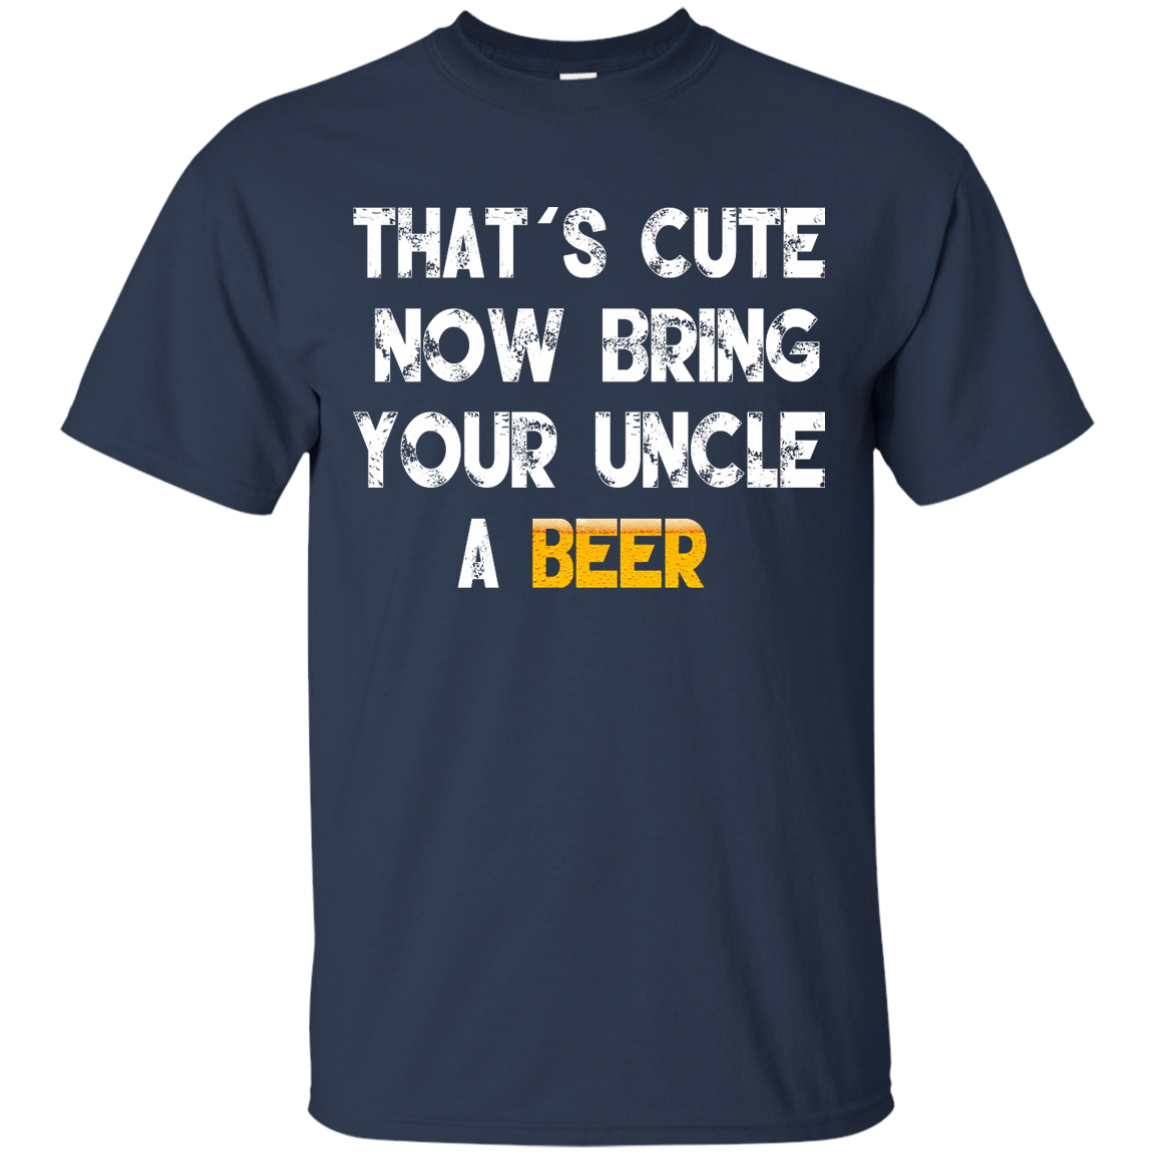 That's Cute Now Bring Your Uncle A Beer Shirt, Hoodie, Tank